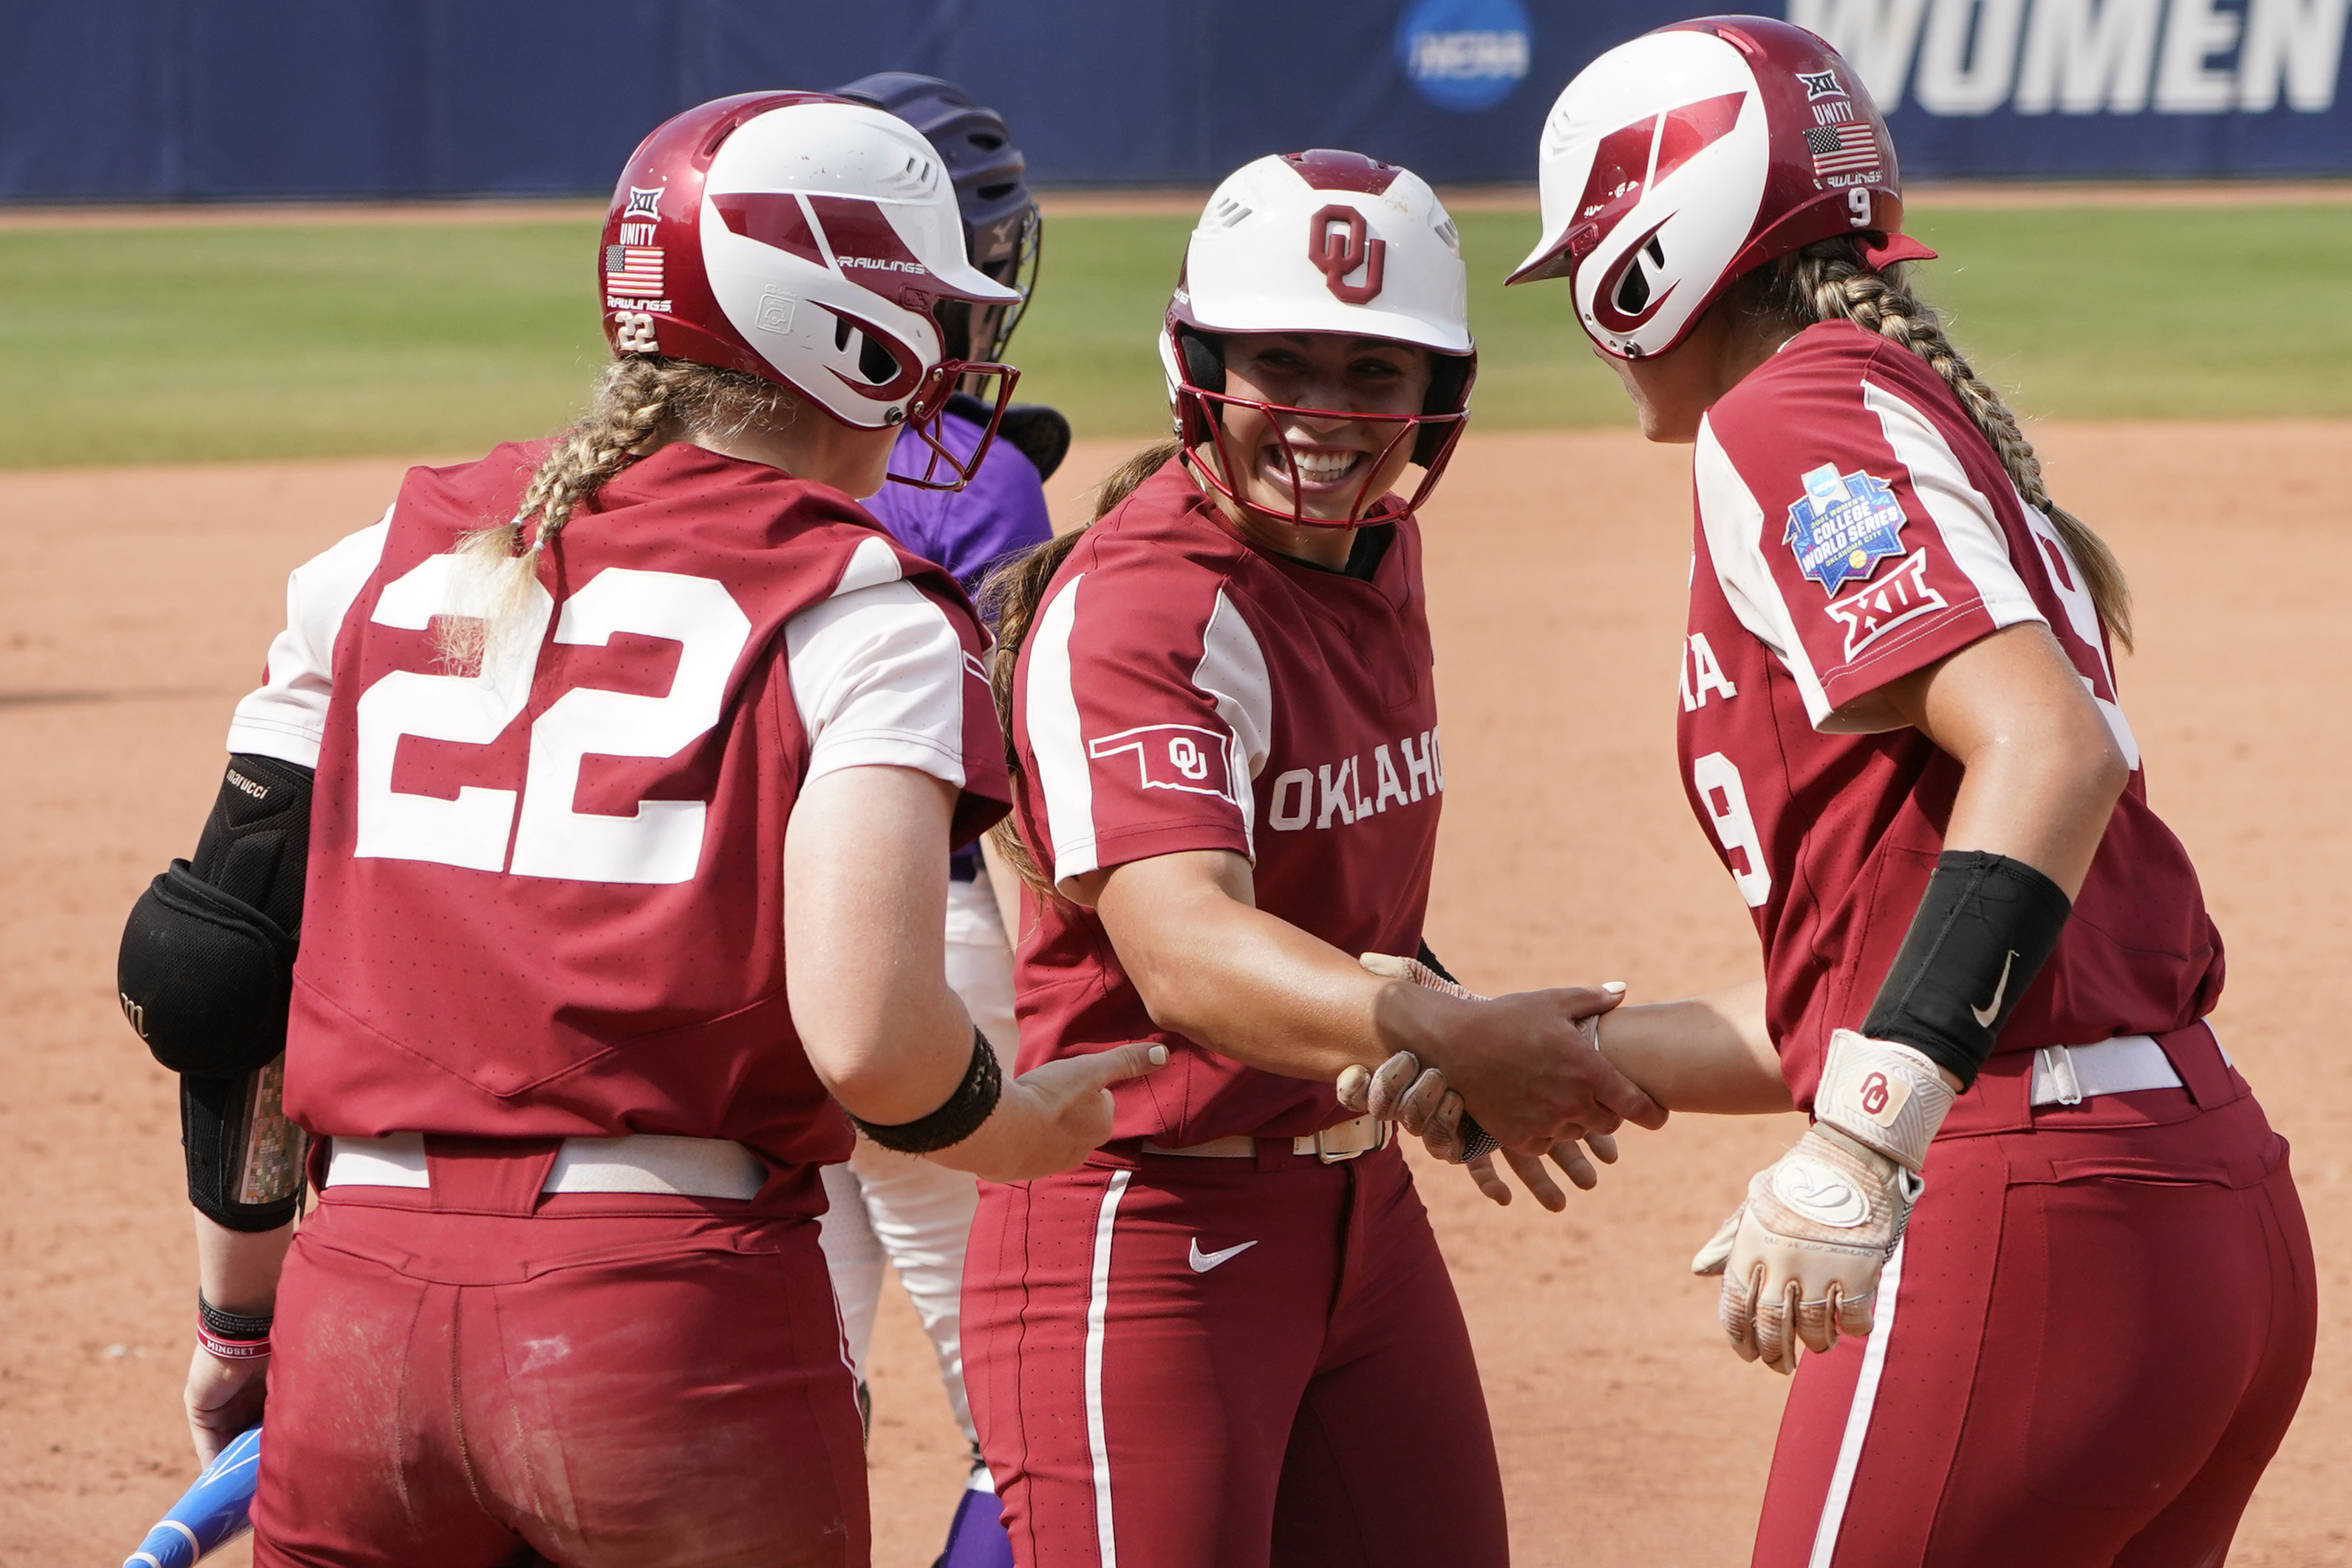 How to Watch the Womens College World Series Final - Oklahoma vs